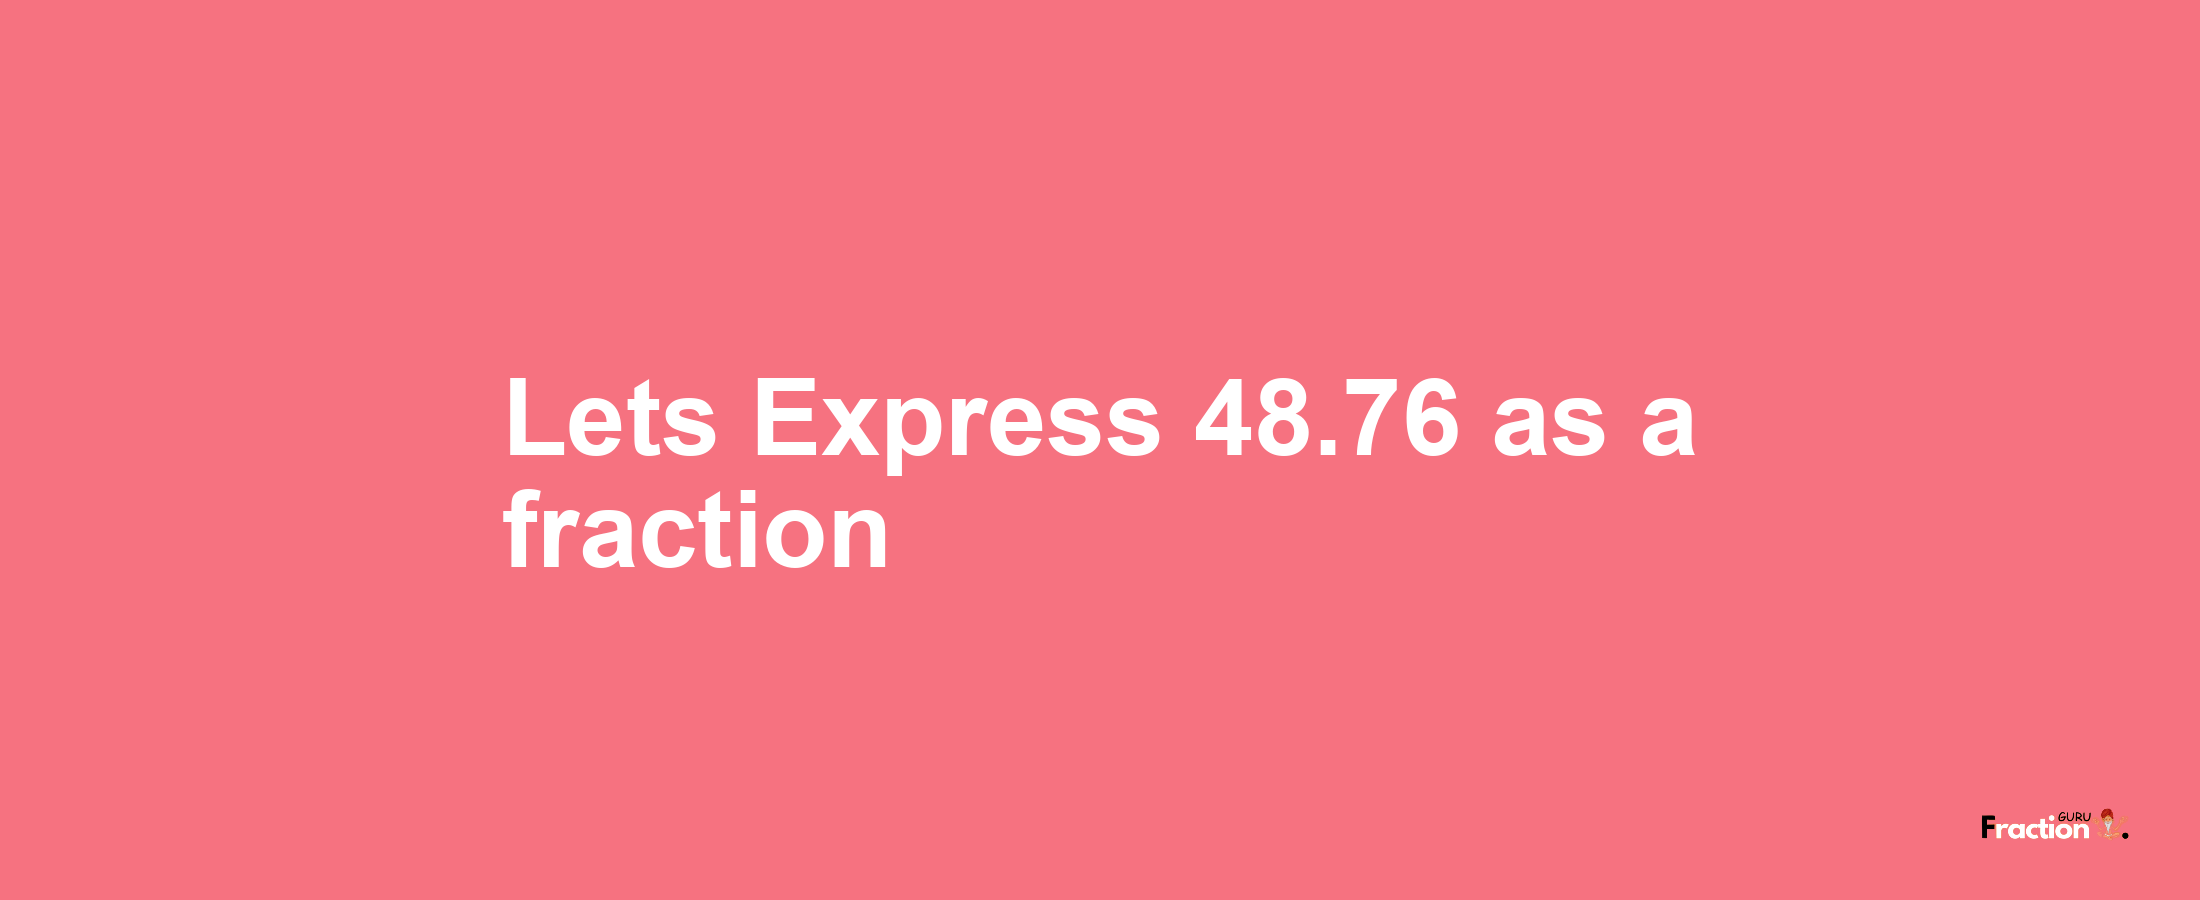 Lets Express 48.76 as afraction